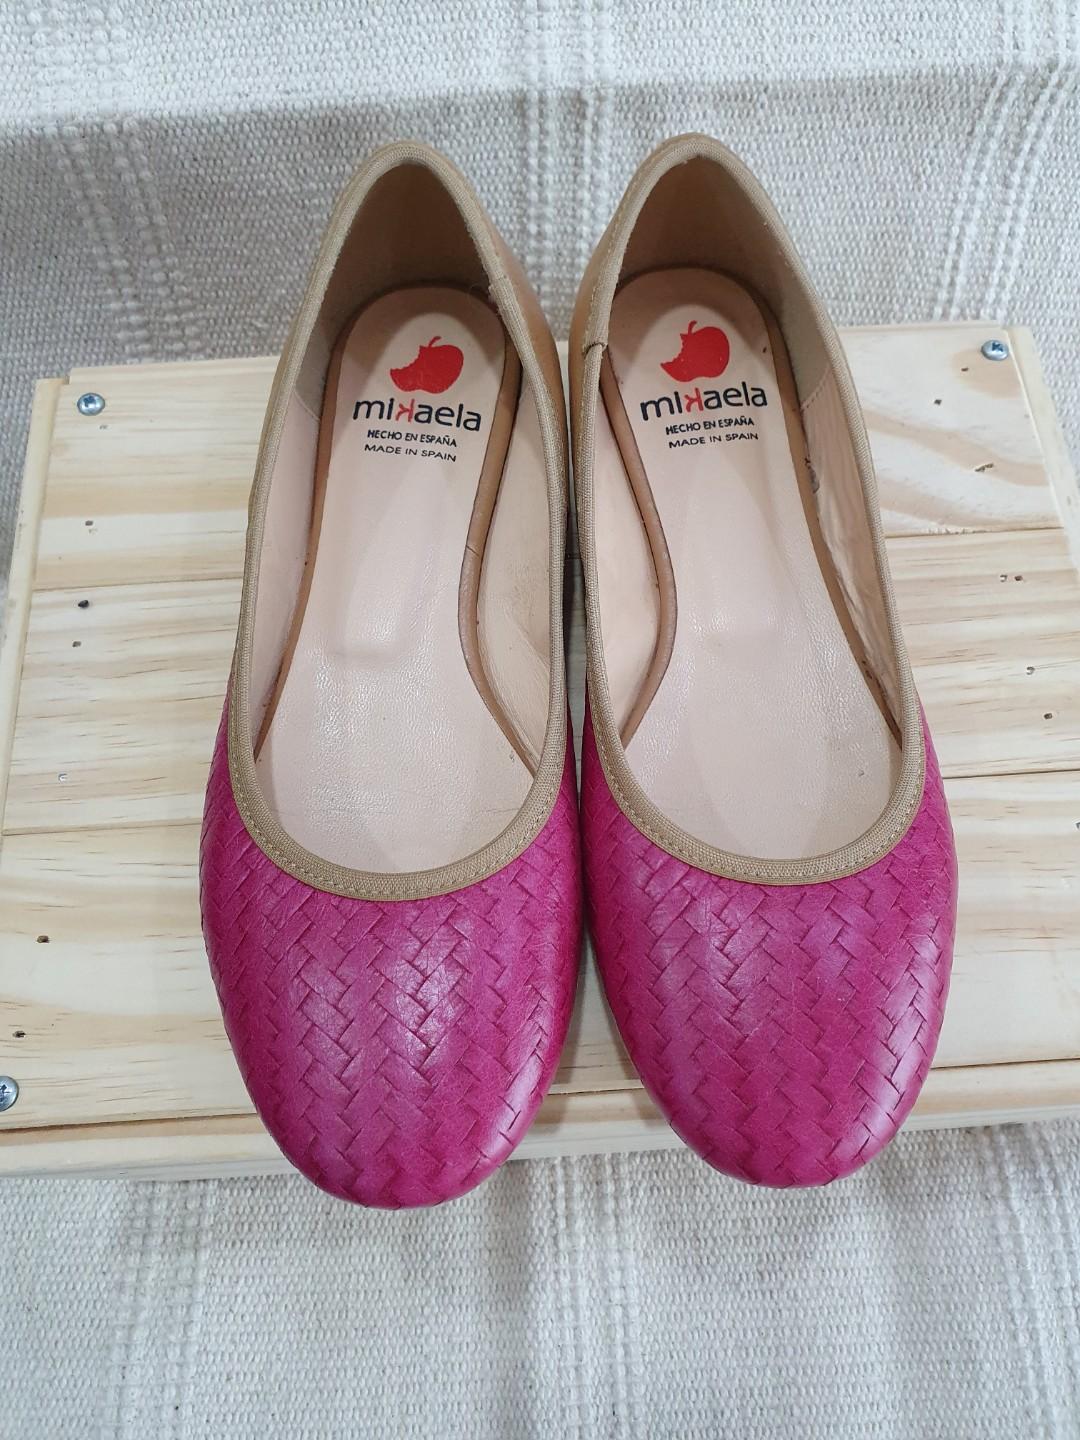 Mikaela Spain Pink Braided Leather Accents Flats Shoes Authentic, Women's  Fashion, Footwear, Flats on Carousell